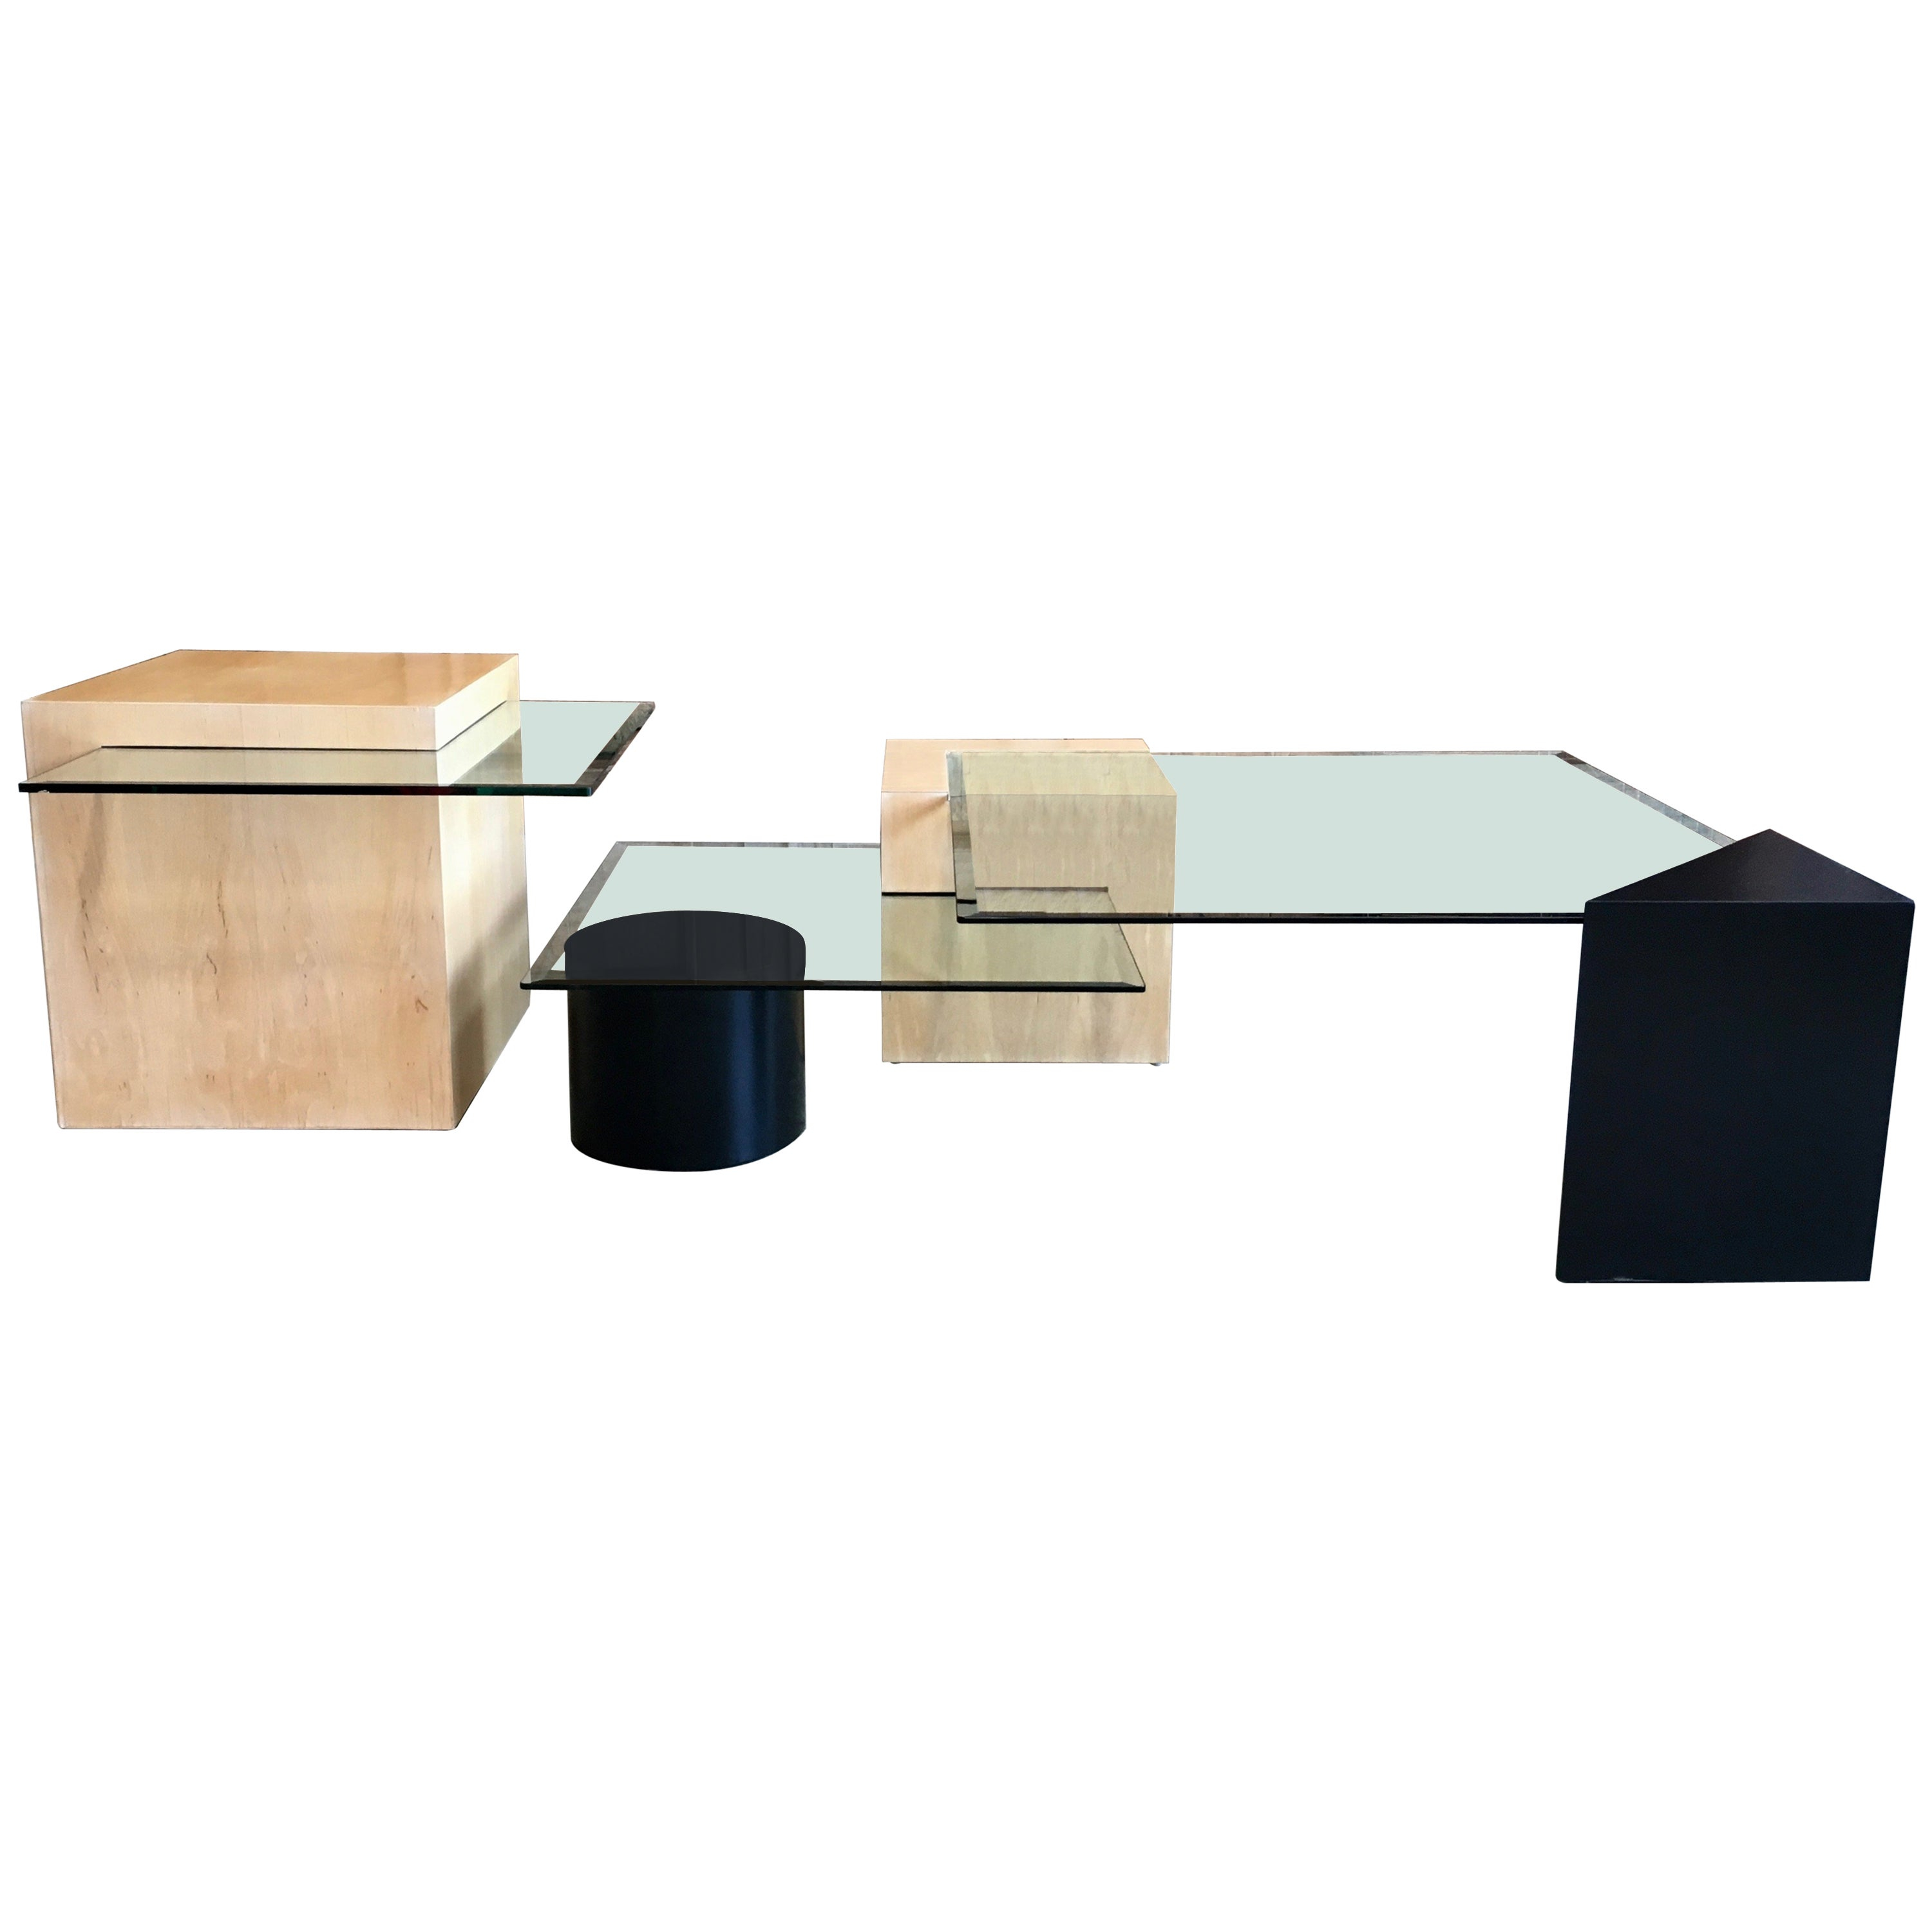 Geometric Wood And Glass Multi Level Coffee Table At 1stdibs pertaining to size 3000 X 3000